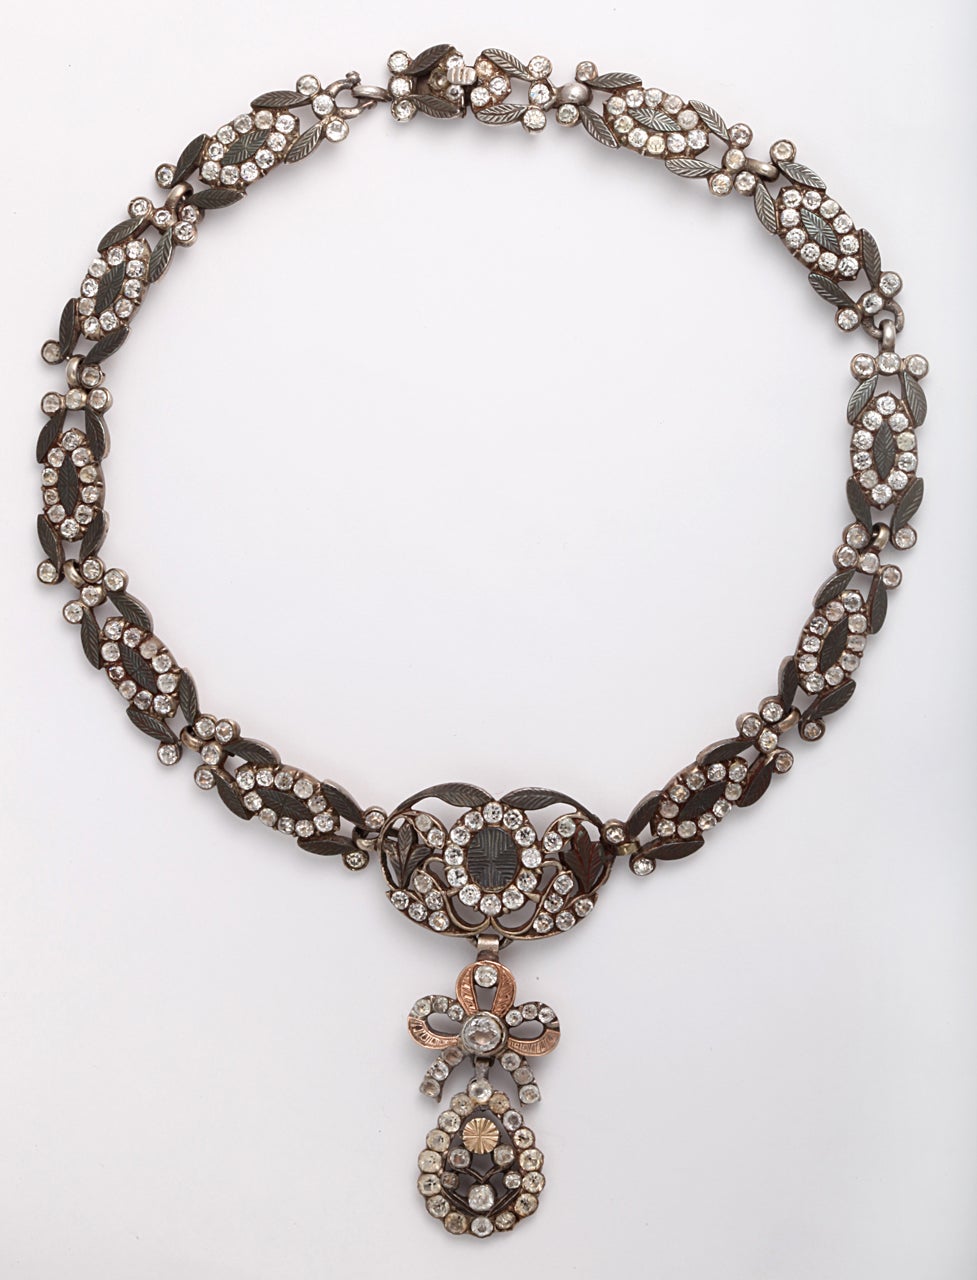 A necklace of the Georgian era that fills us with pleasure at its beauty and  in the way it is made. Jewelry such as this is so individual to the hands of the artist and the creative process involved.  Then necklace exhibits the finest design and